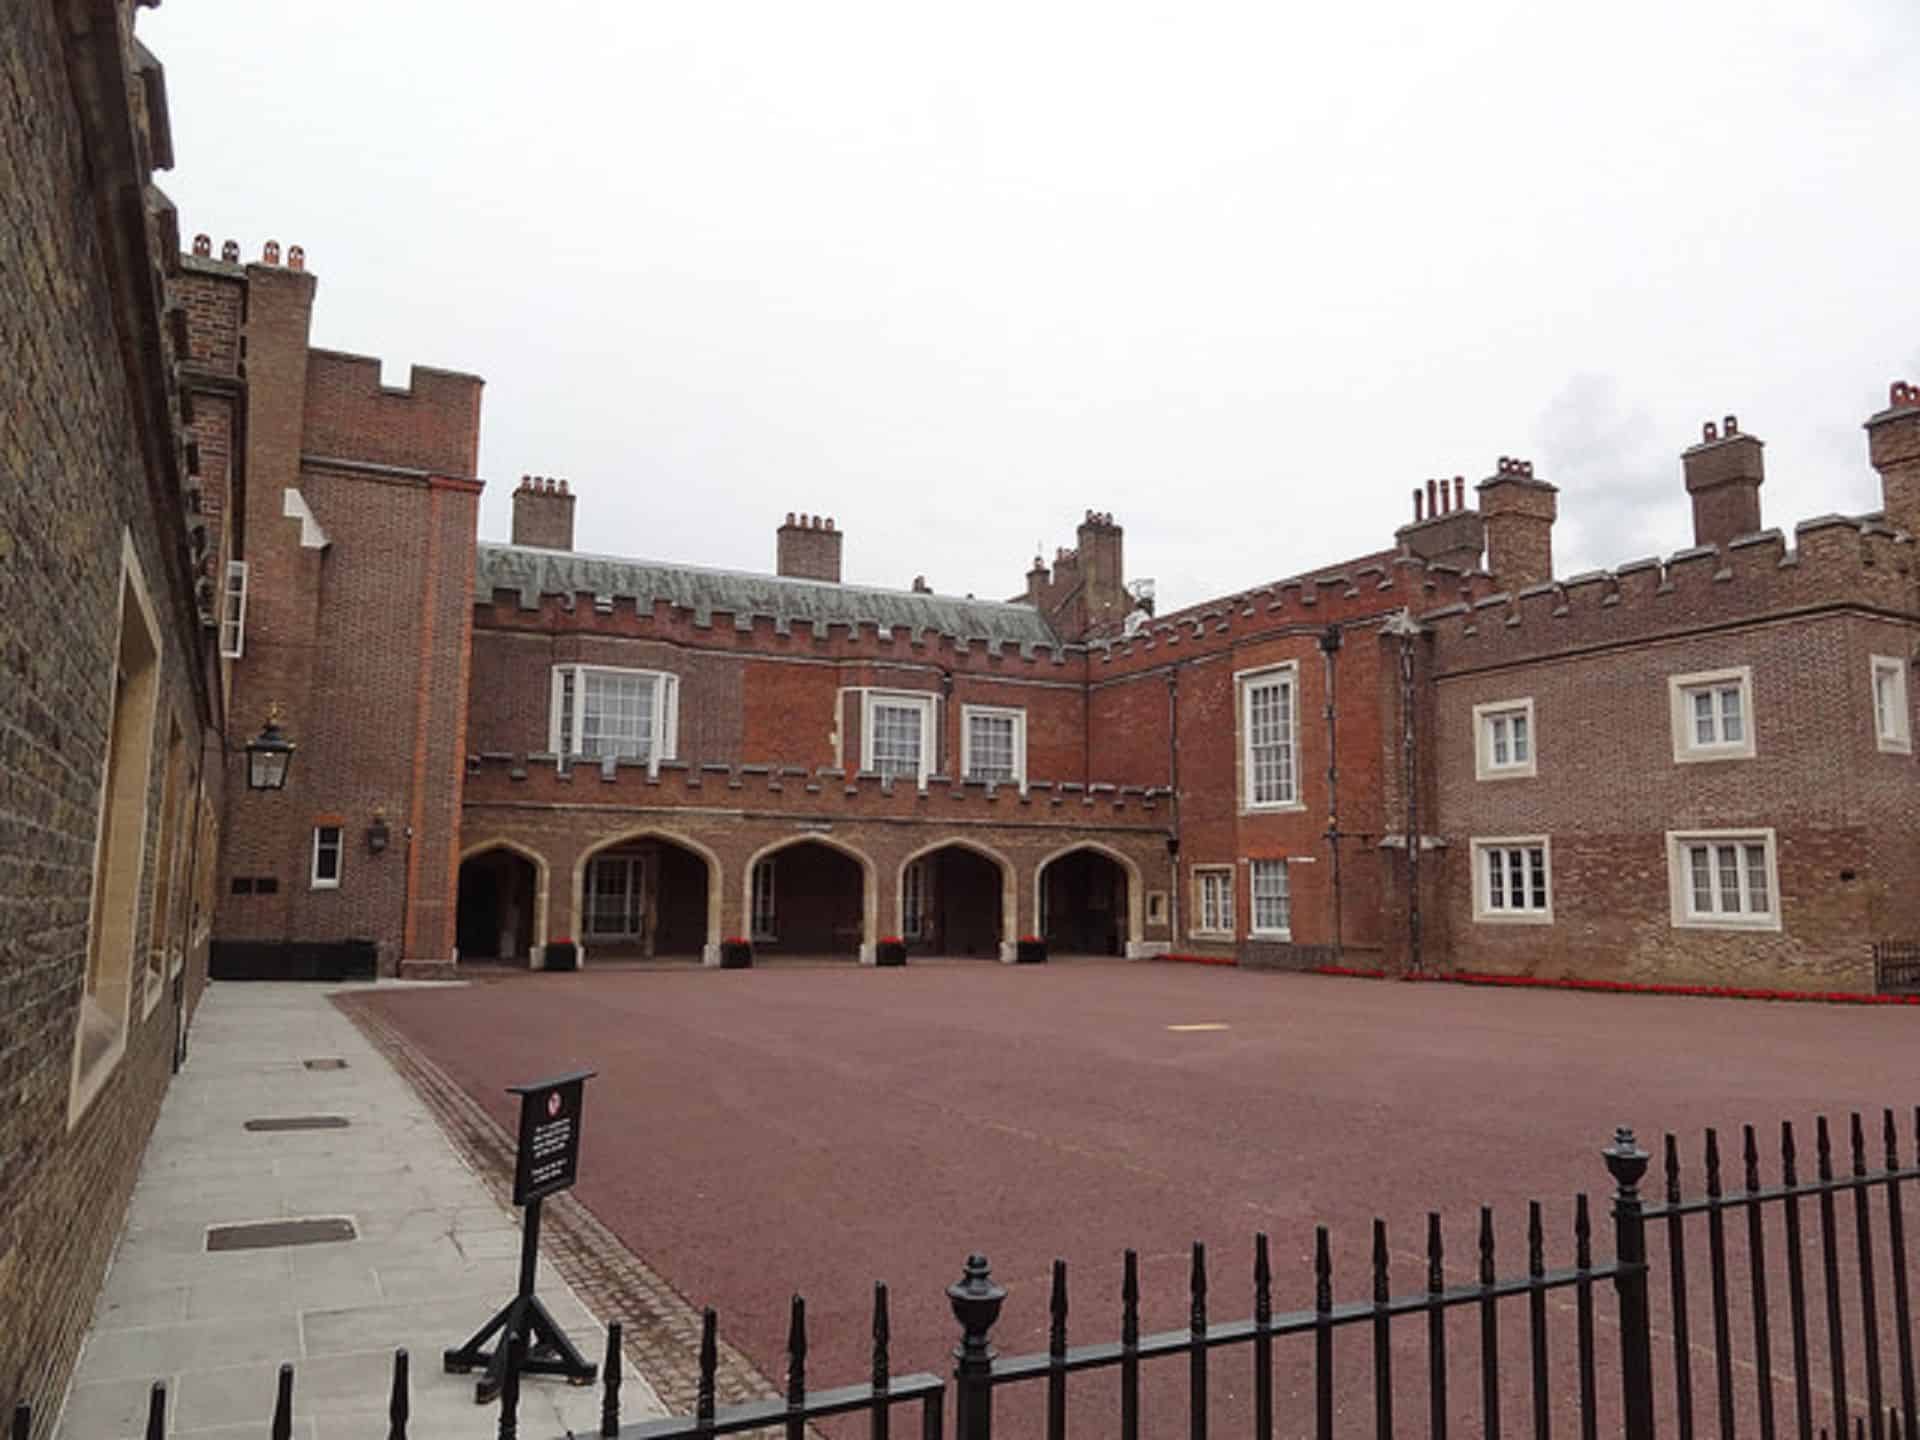 St James's Palace in UK